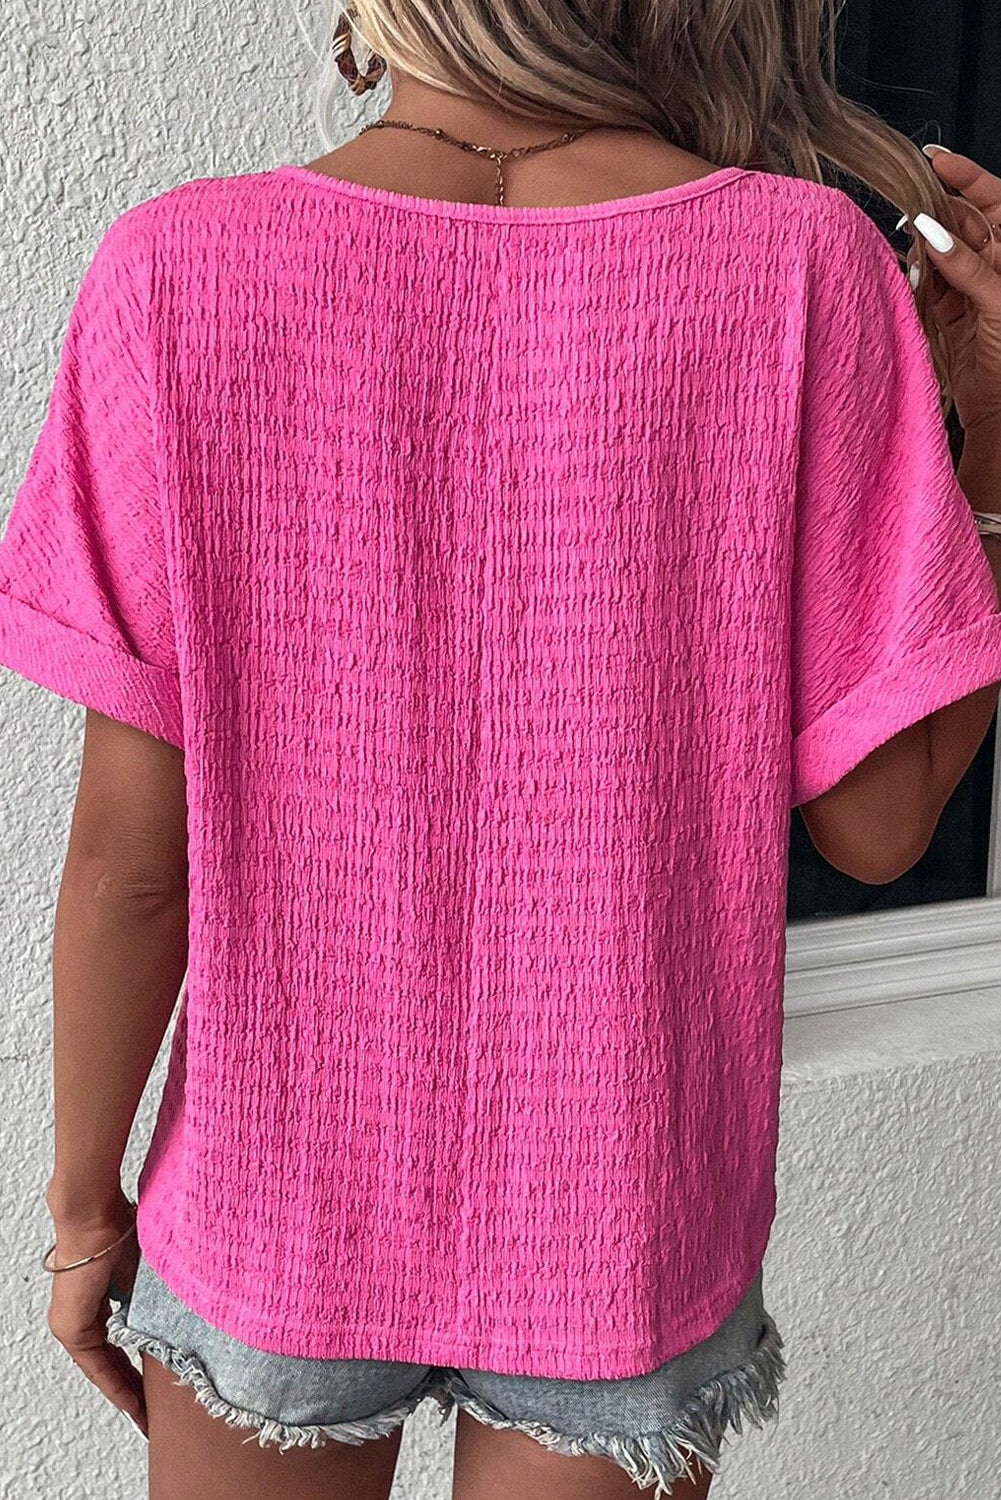 Bright Pink Textured V Neck Batwing Sleeve Plus Size Blouse